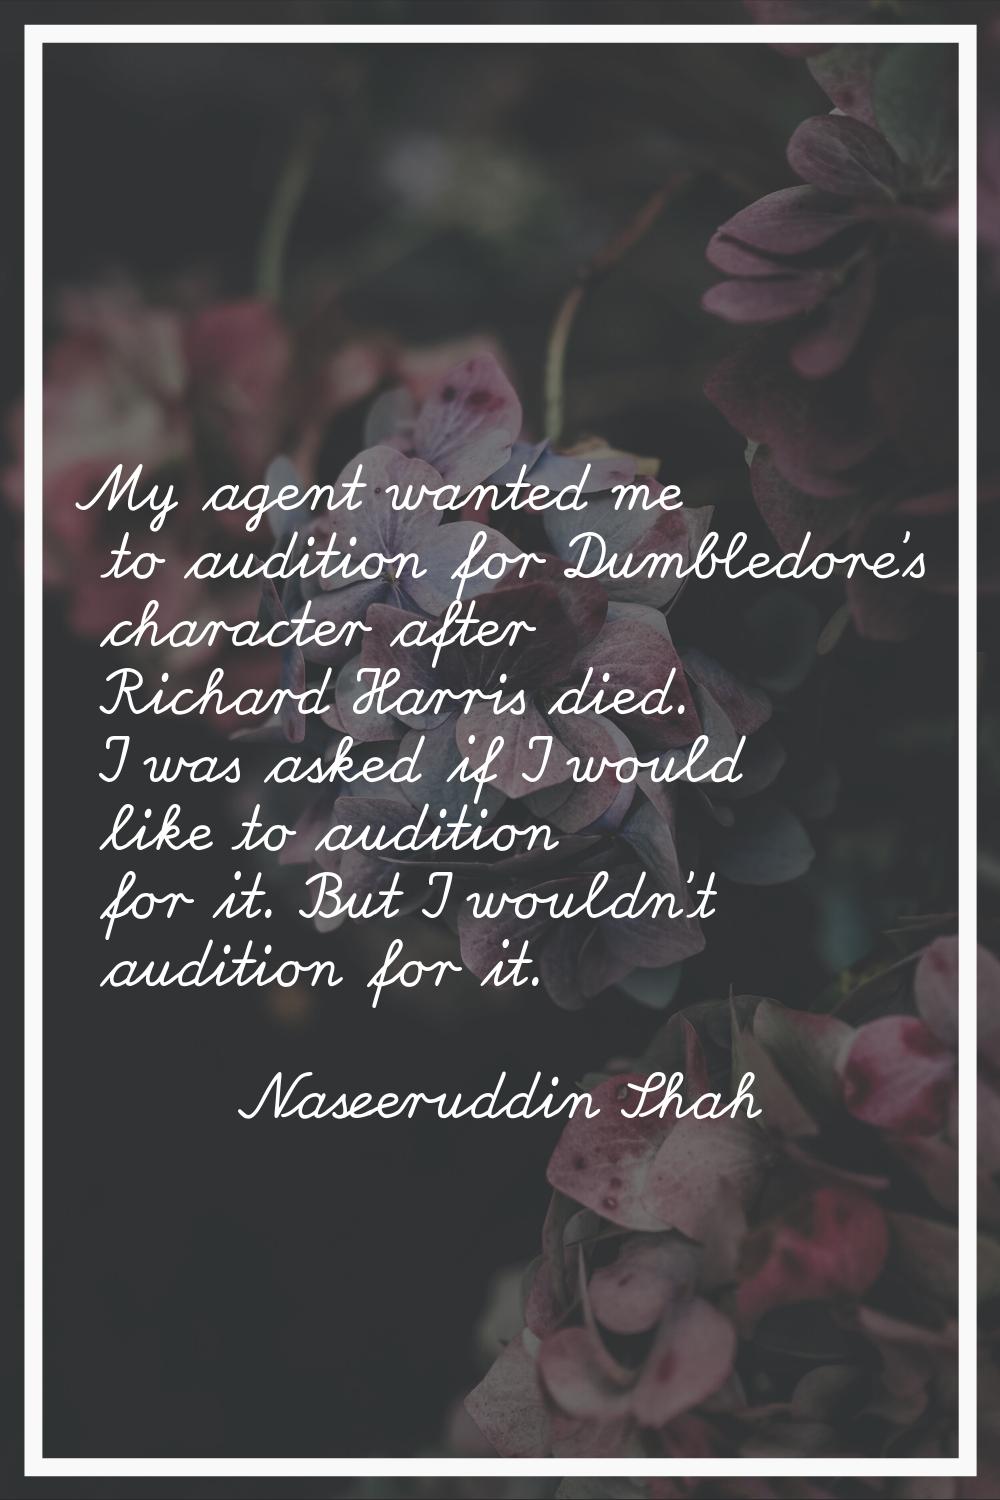 My agent wanted me to audition for Dumbledore's character after Richard Harris died. I was asked if